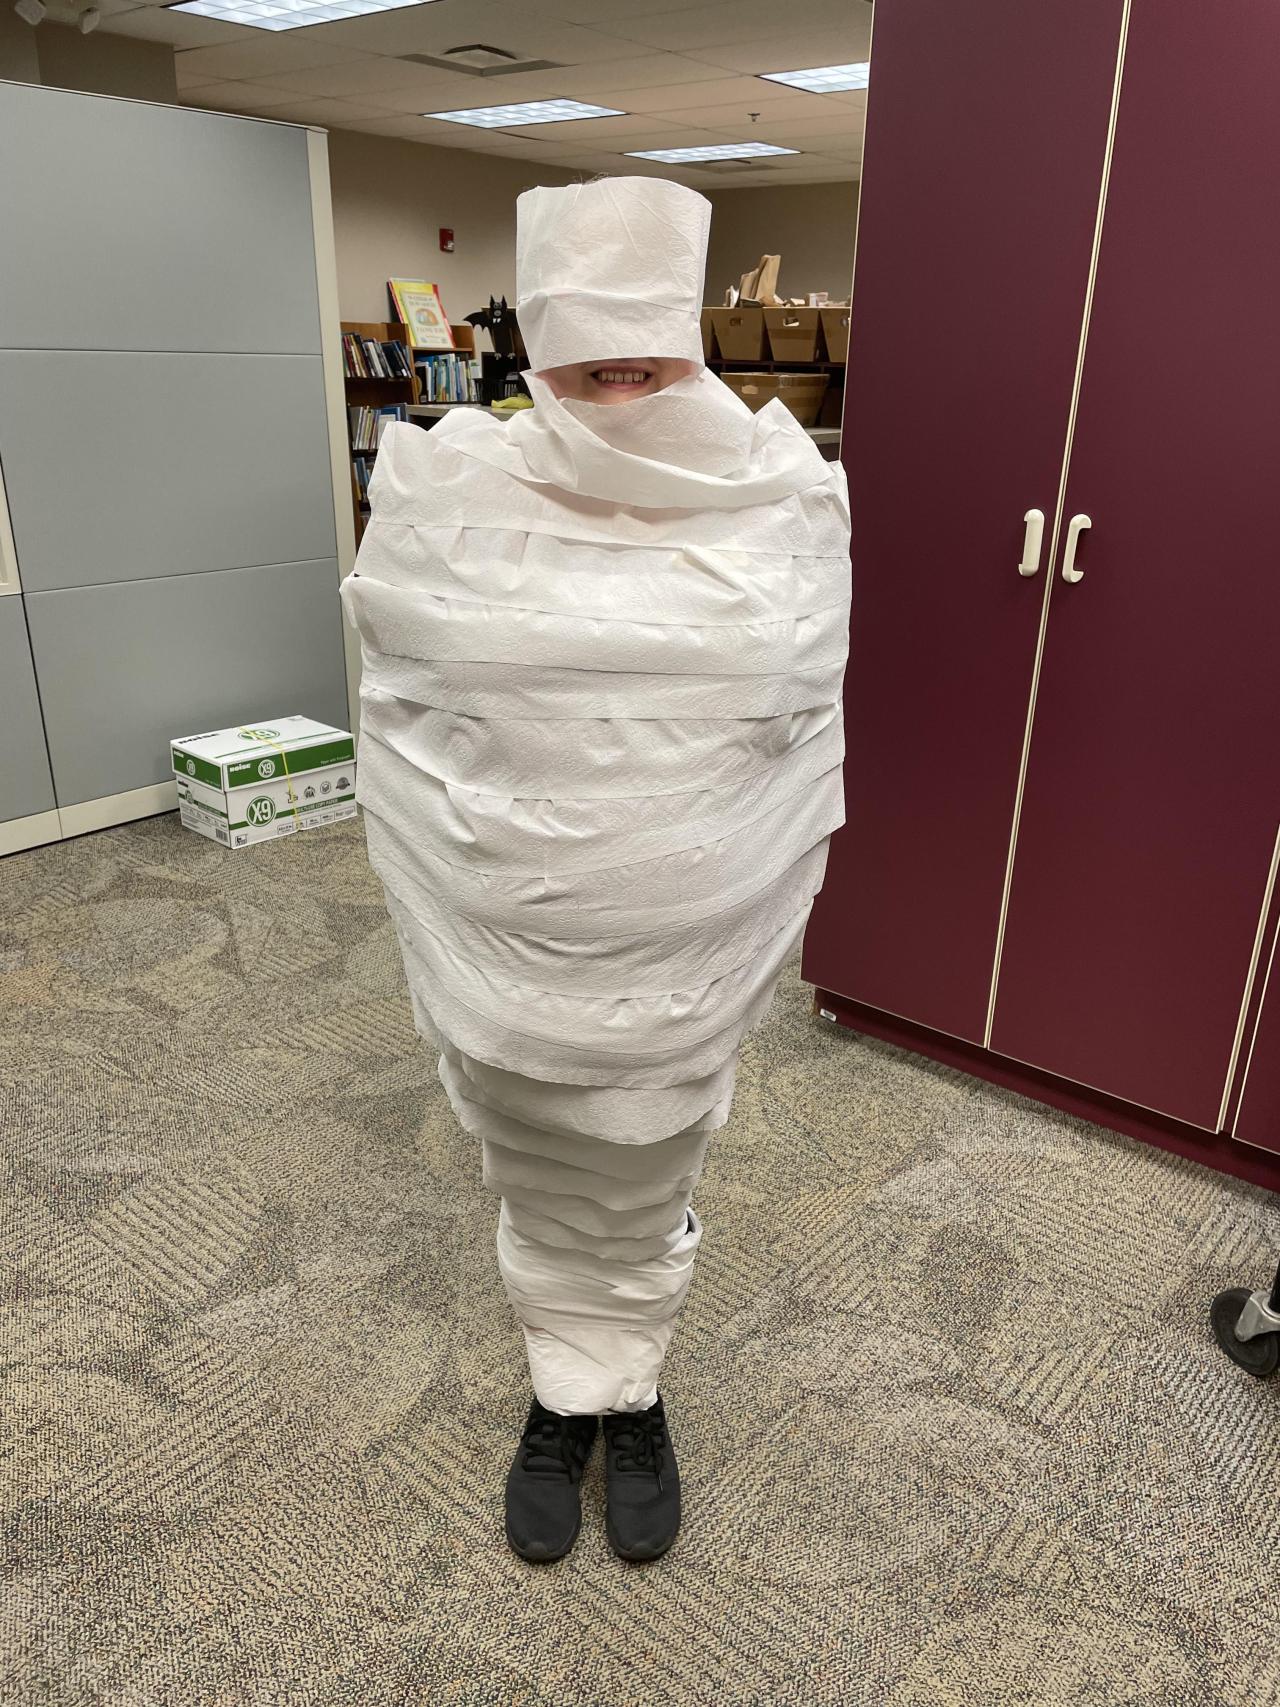 The librarian is completely wrapped head to toe in toilet paper. You can still see her grin